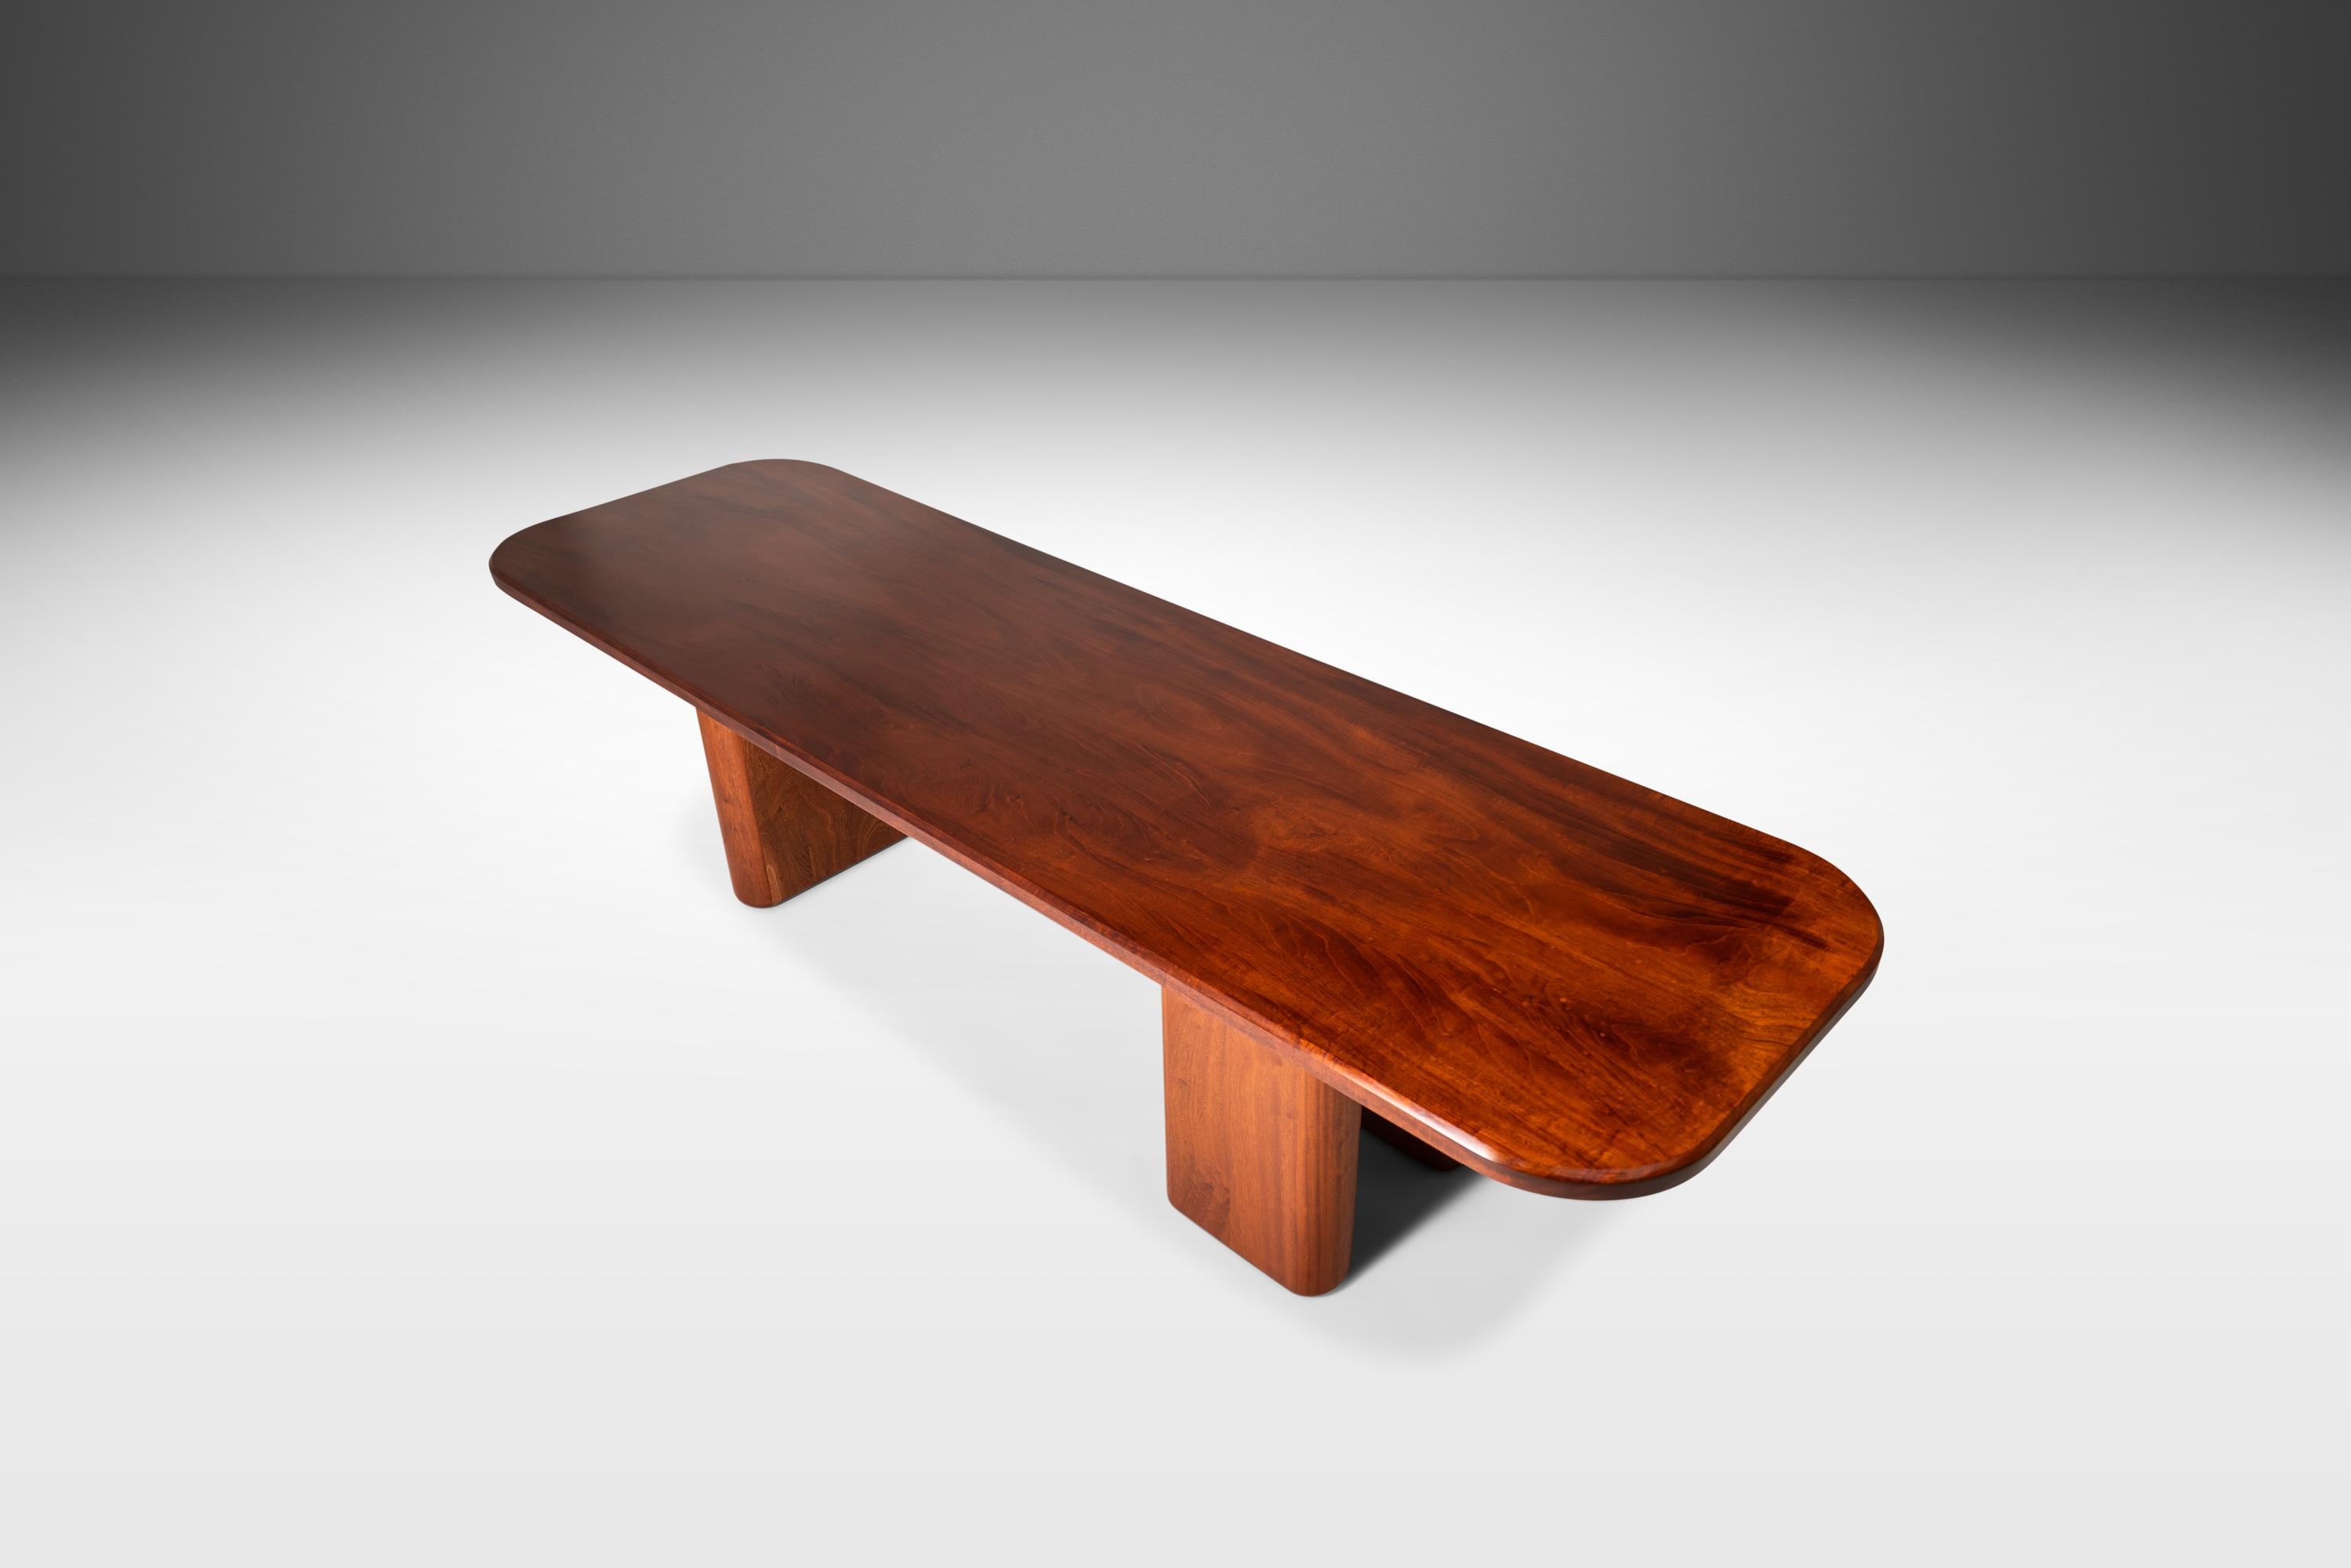 Breathtaking both in scope and material this exquisite conference table is truly a work of functional art. Constructed from a single solid slab of Madagascar Mahogany, a rare wood species that is considered by many carpenters as the finest in the